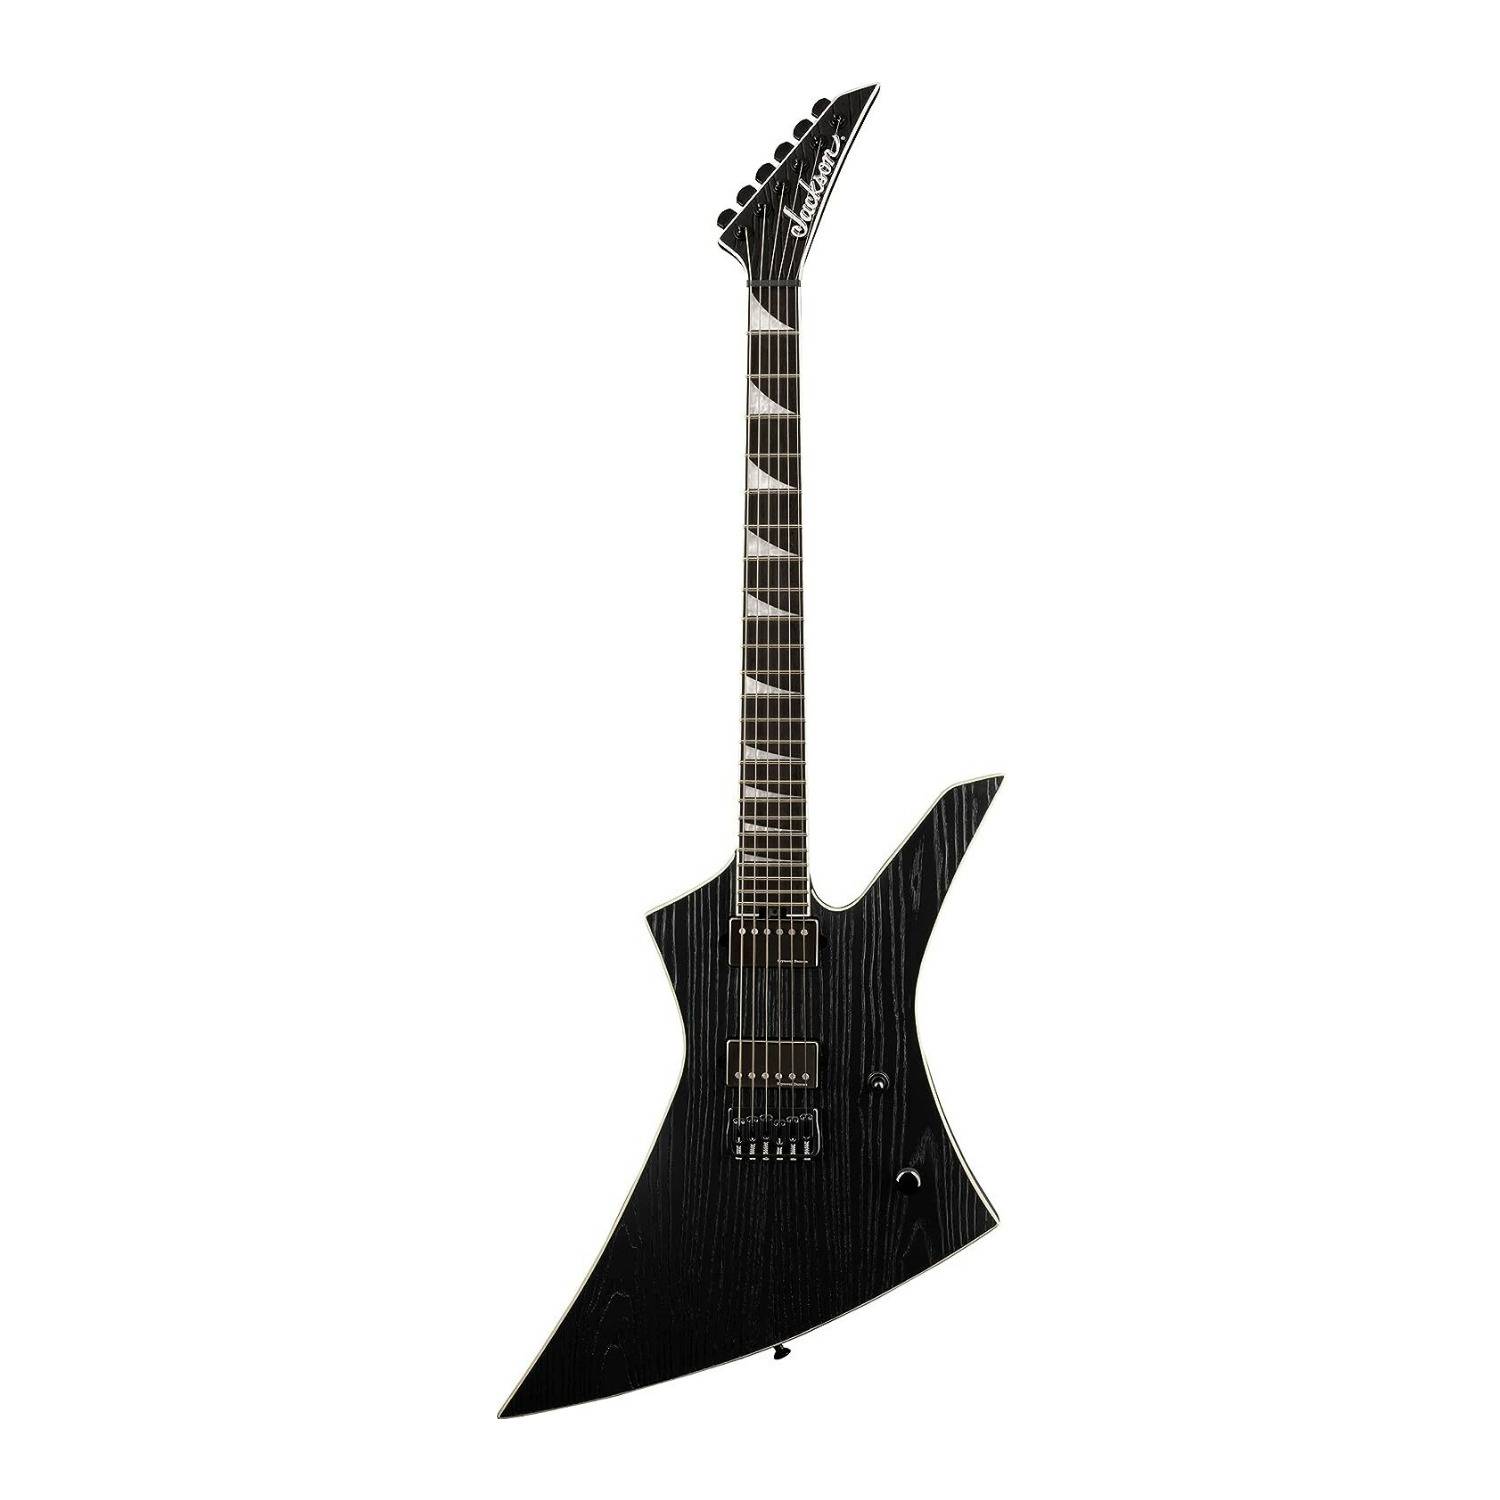 Jackson Limited Edition Signature Right-Handed 6-String Electric Guitar with Maple Neck (Black)